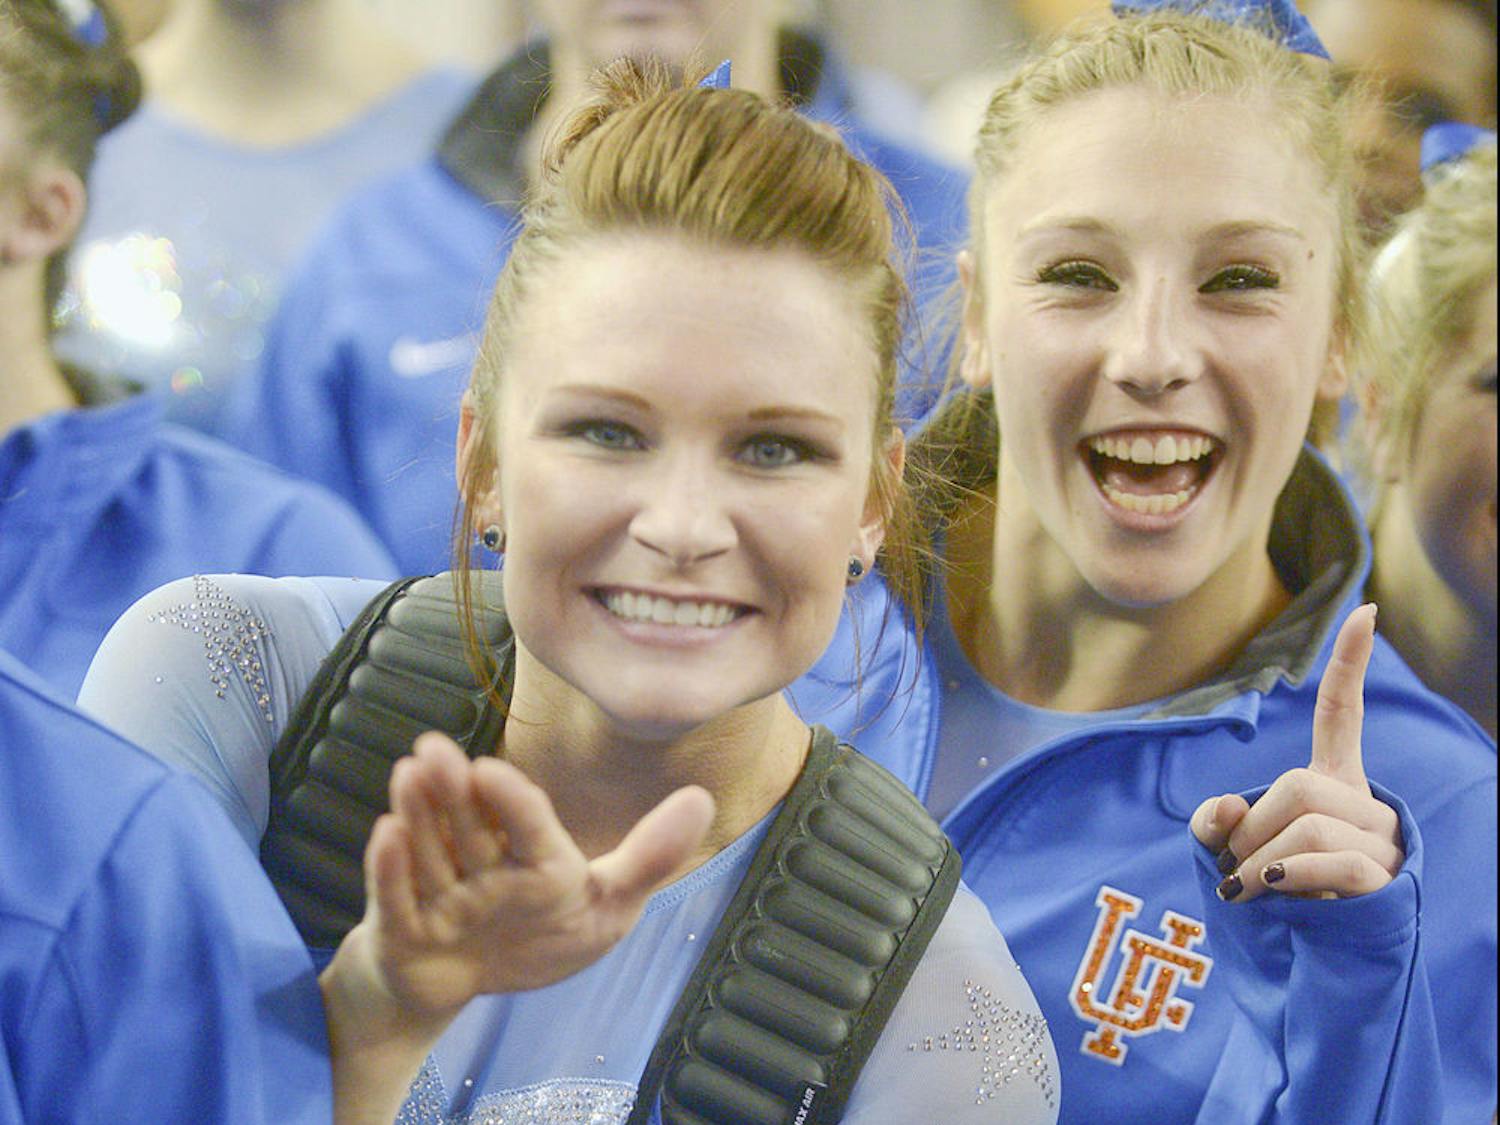 Florida junior all-arounder Bridget Sloan and freshman all-arounder Alex McMurtry celebrate after competeing on vault during the 2015 NCAA gymnastics championships on Saturday in Fort Worth, Texas.